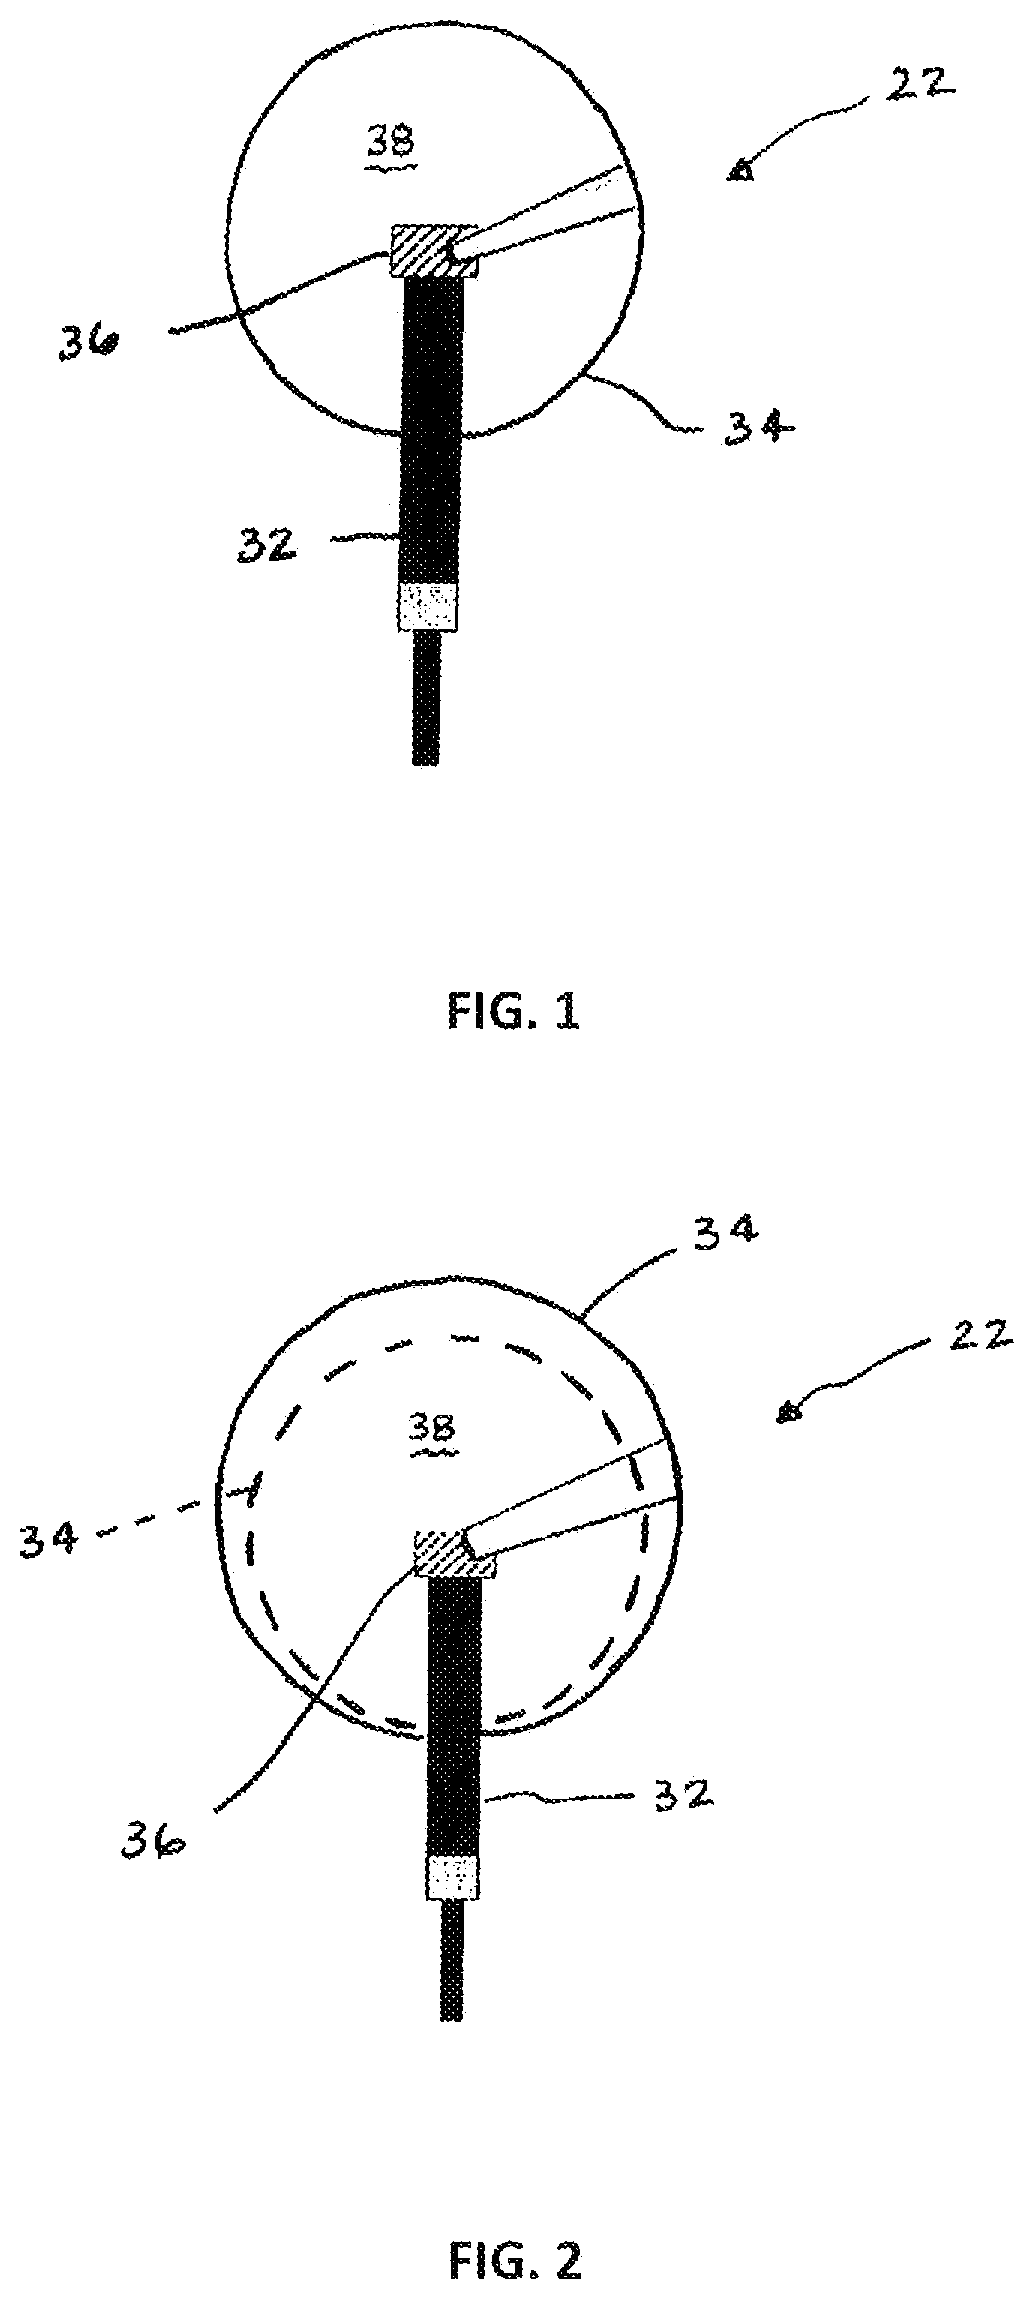 Method and Probe System for Tissue Analysis in a Surgical Cavity in an Intraoperative Procedure